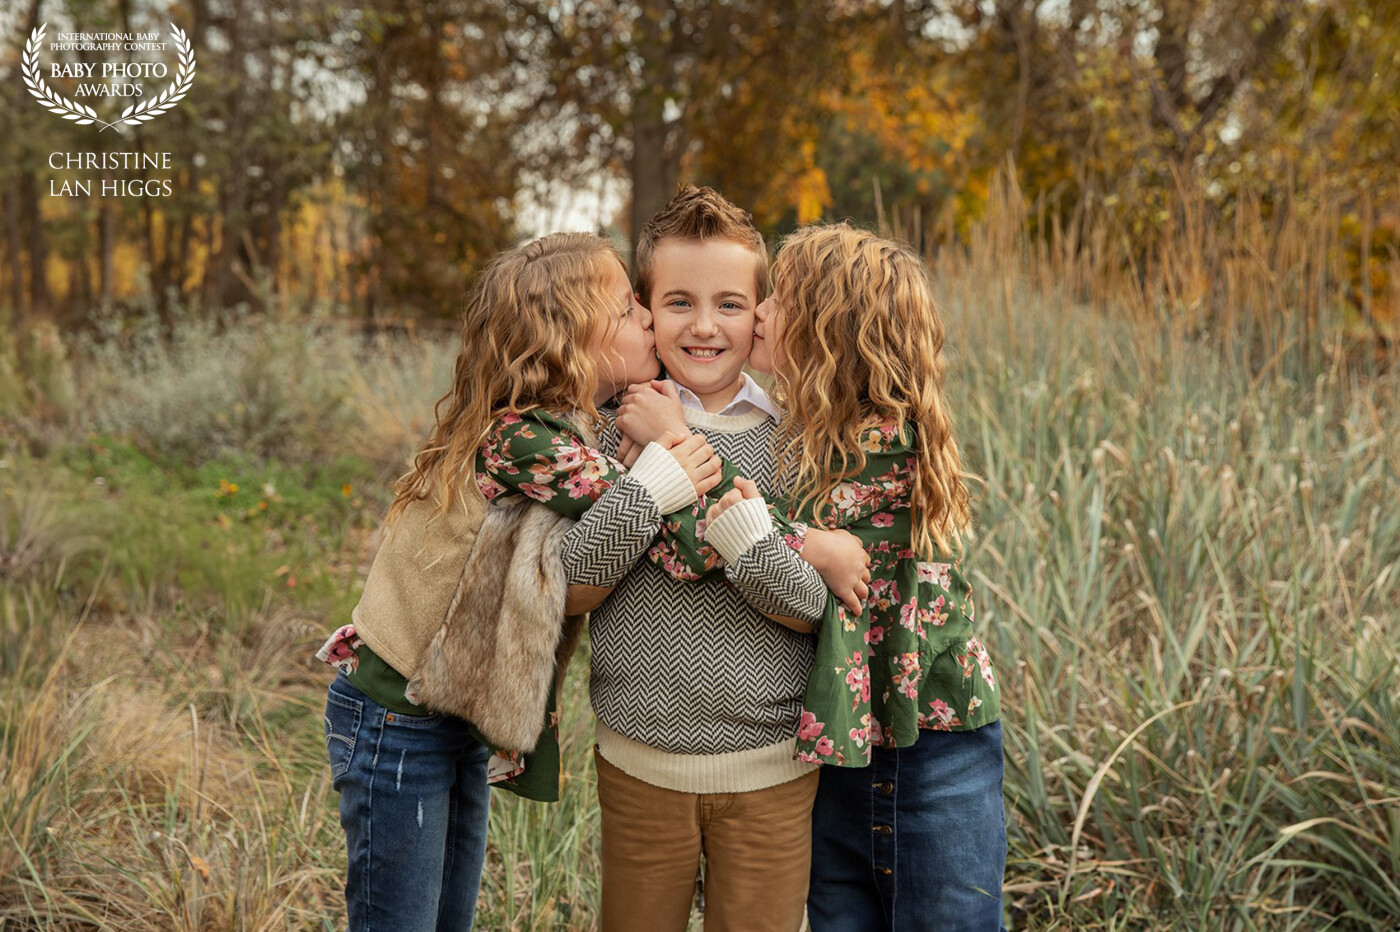 These triplets know how to show each other sibling love!